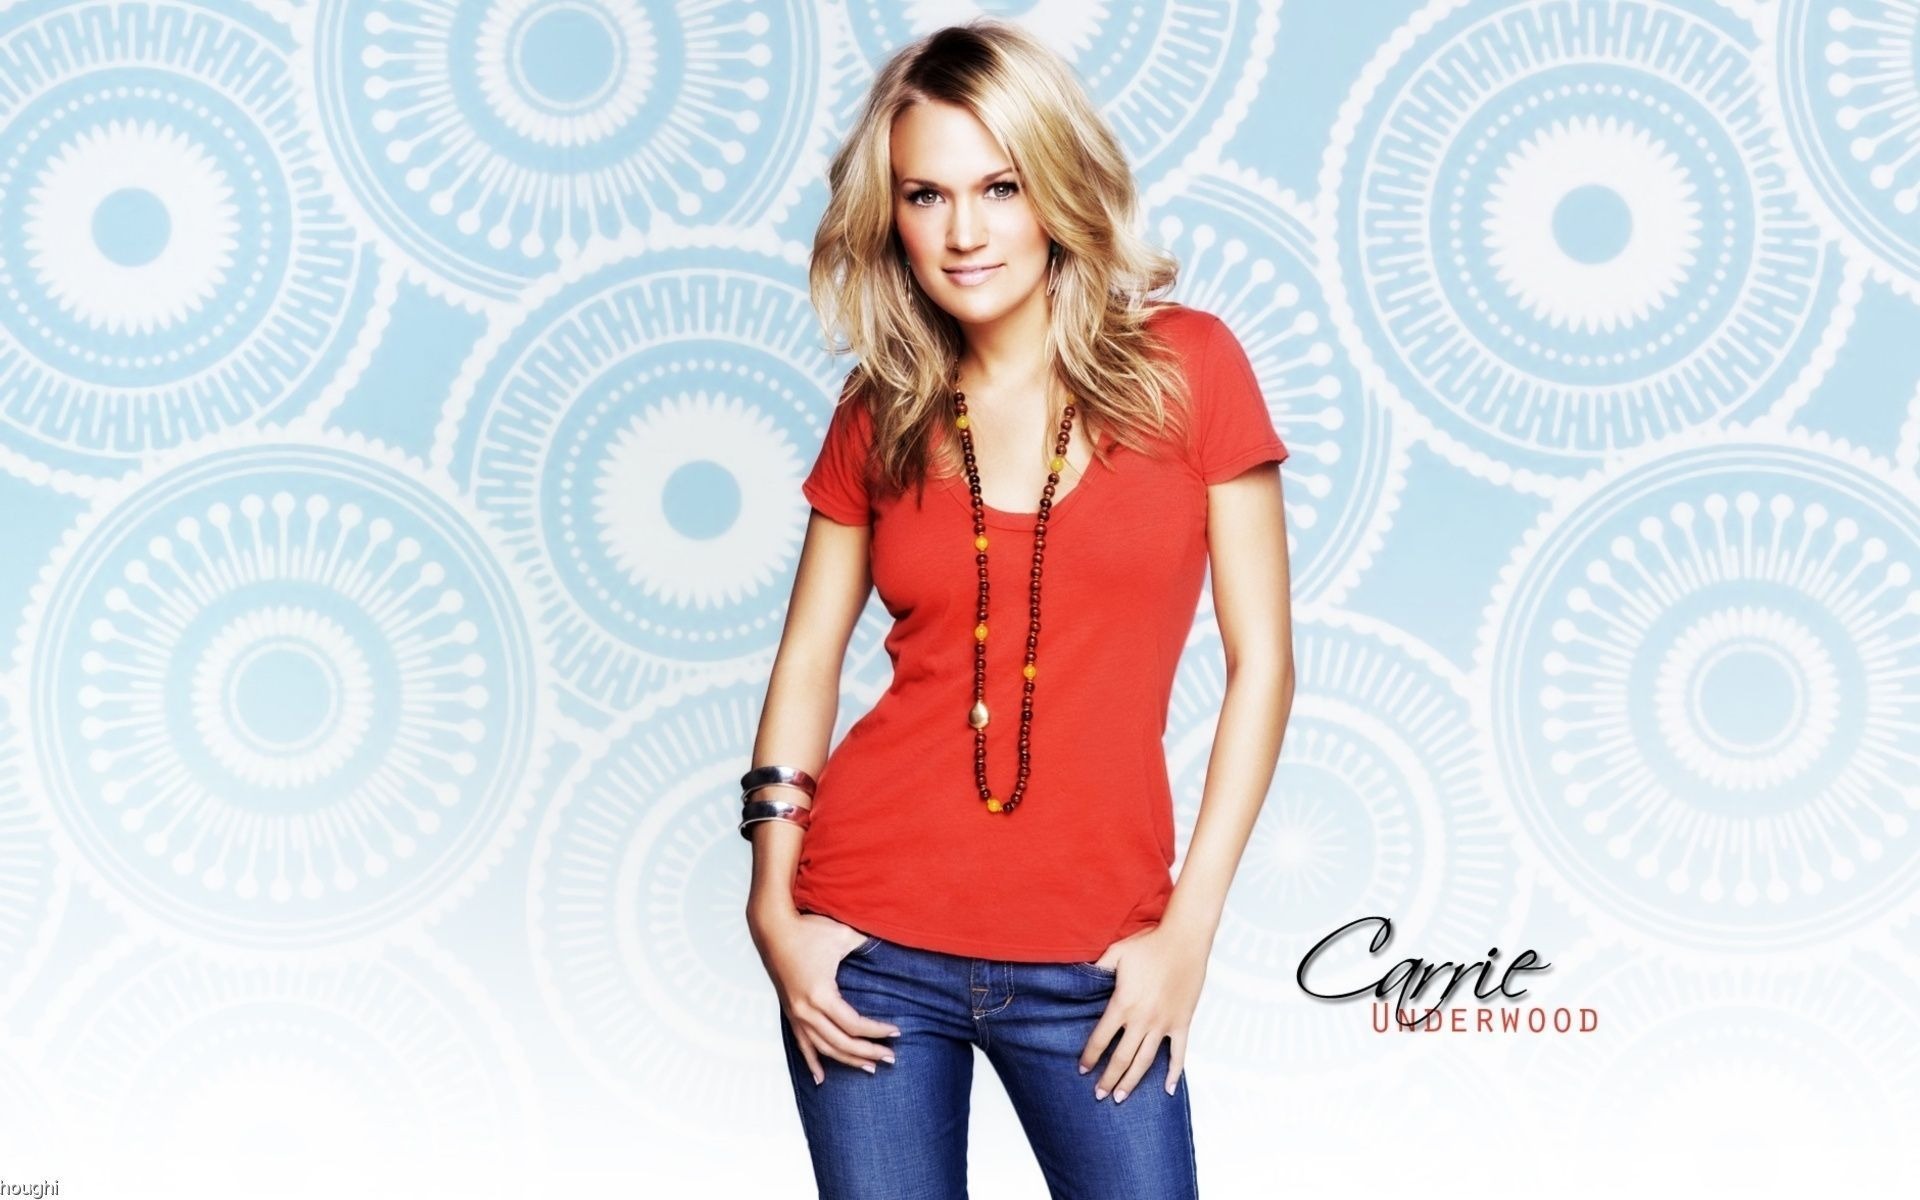 Carrie Underwood #006 - 1920x1200 Wallpapers Pictures Photos Images